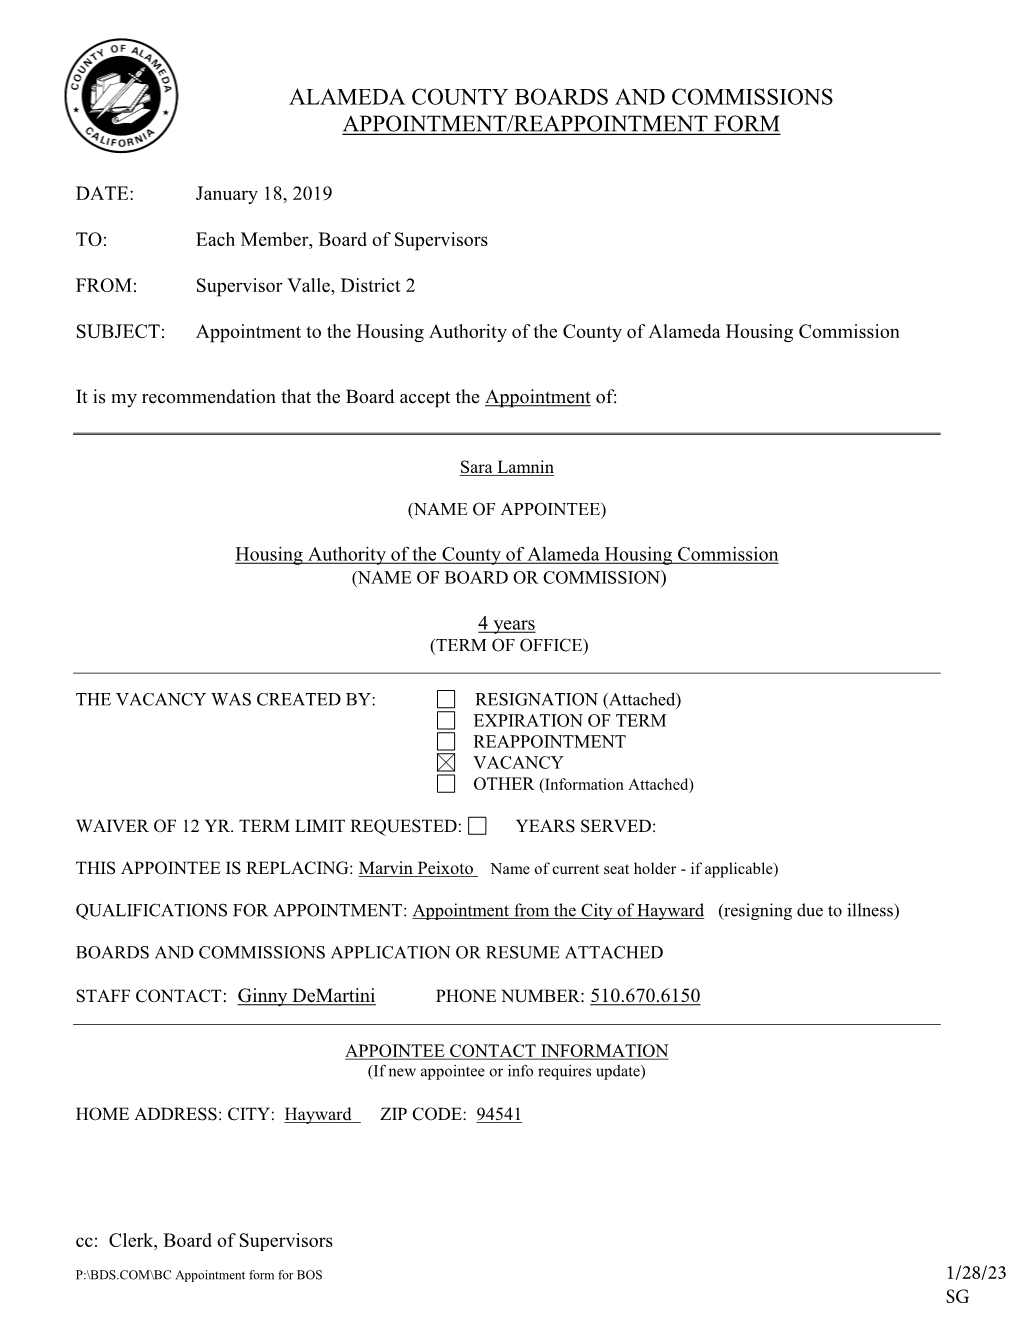 Alameda County Boards and Commissions Appointment/Reappointment Form